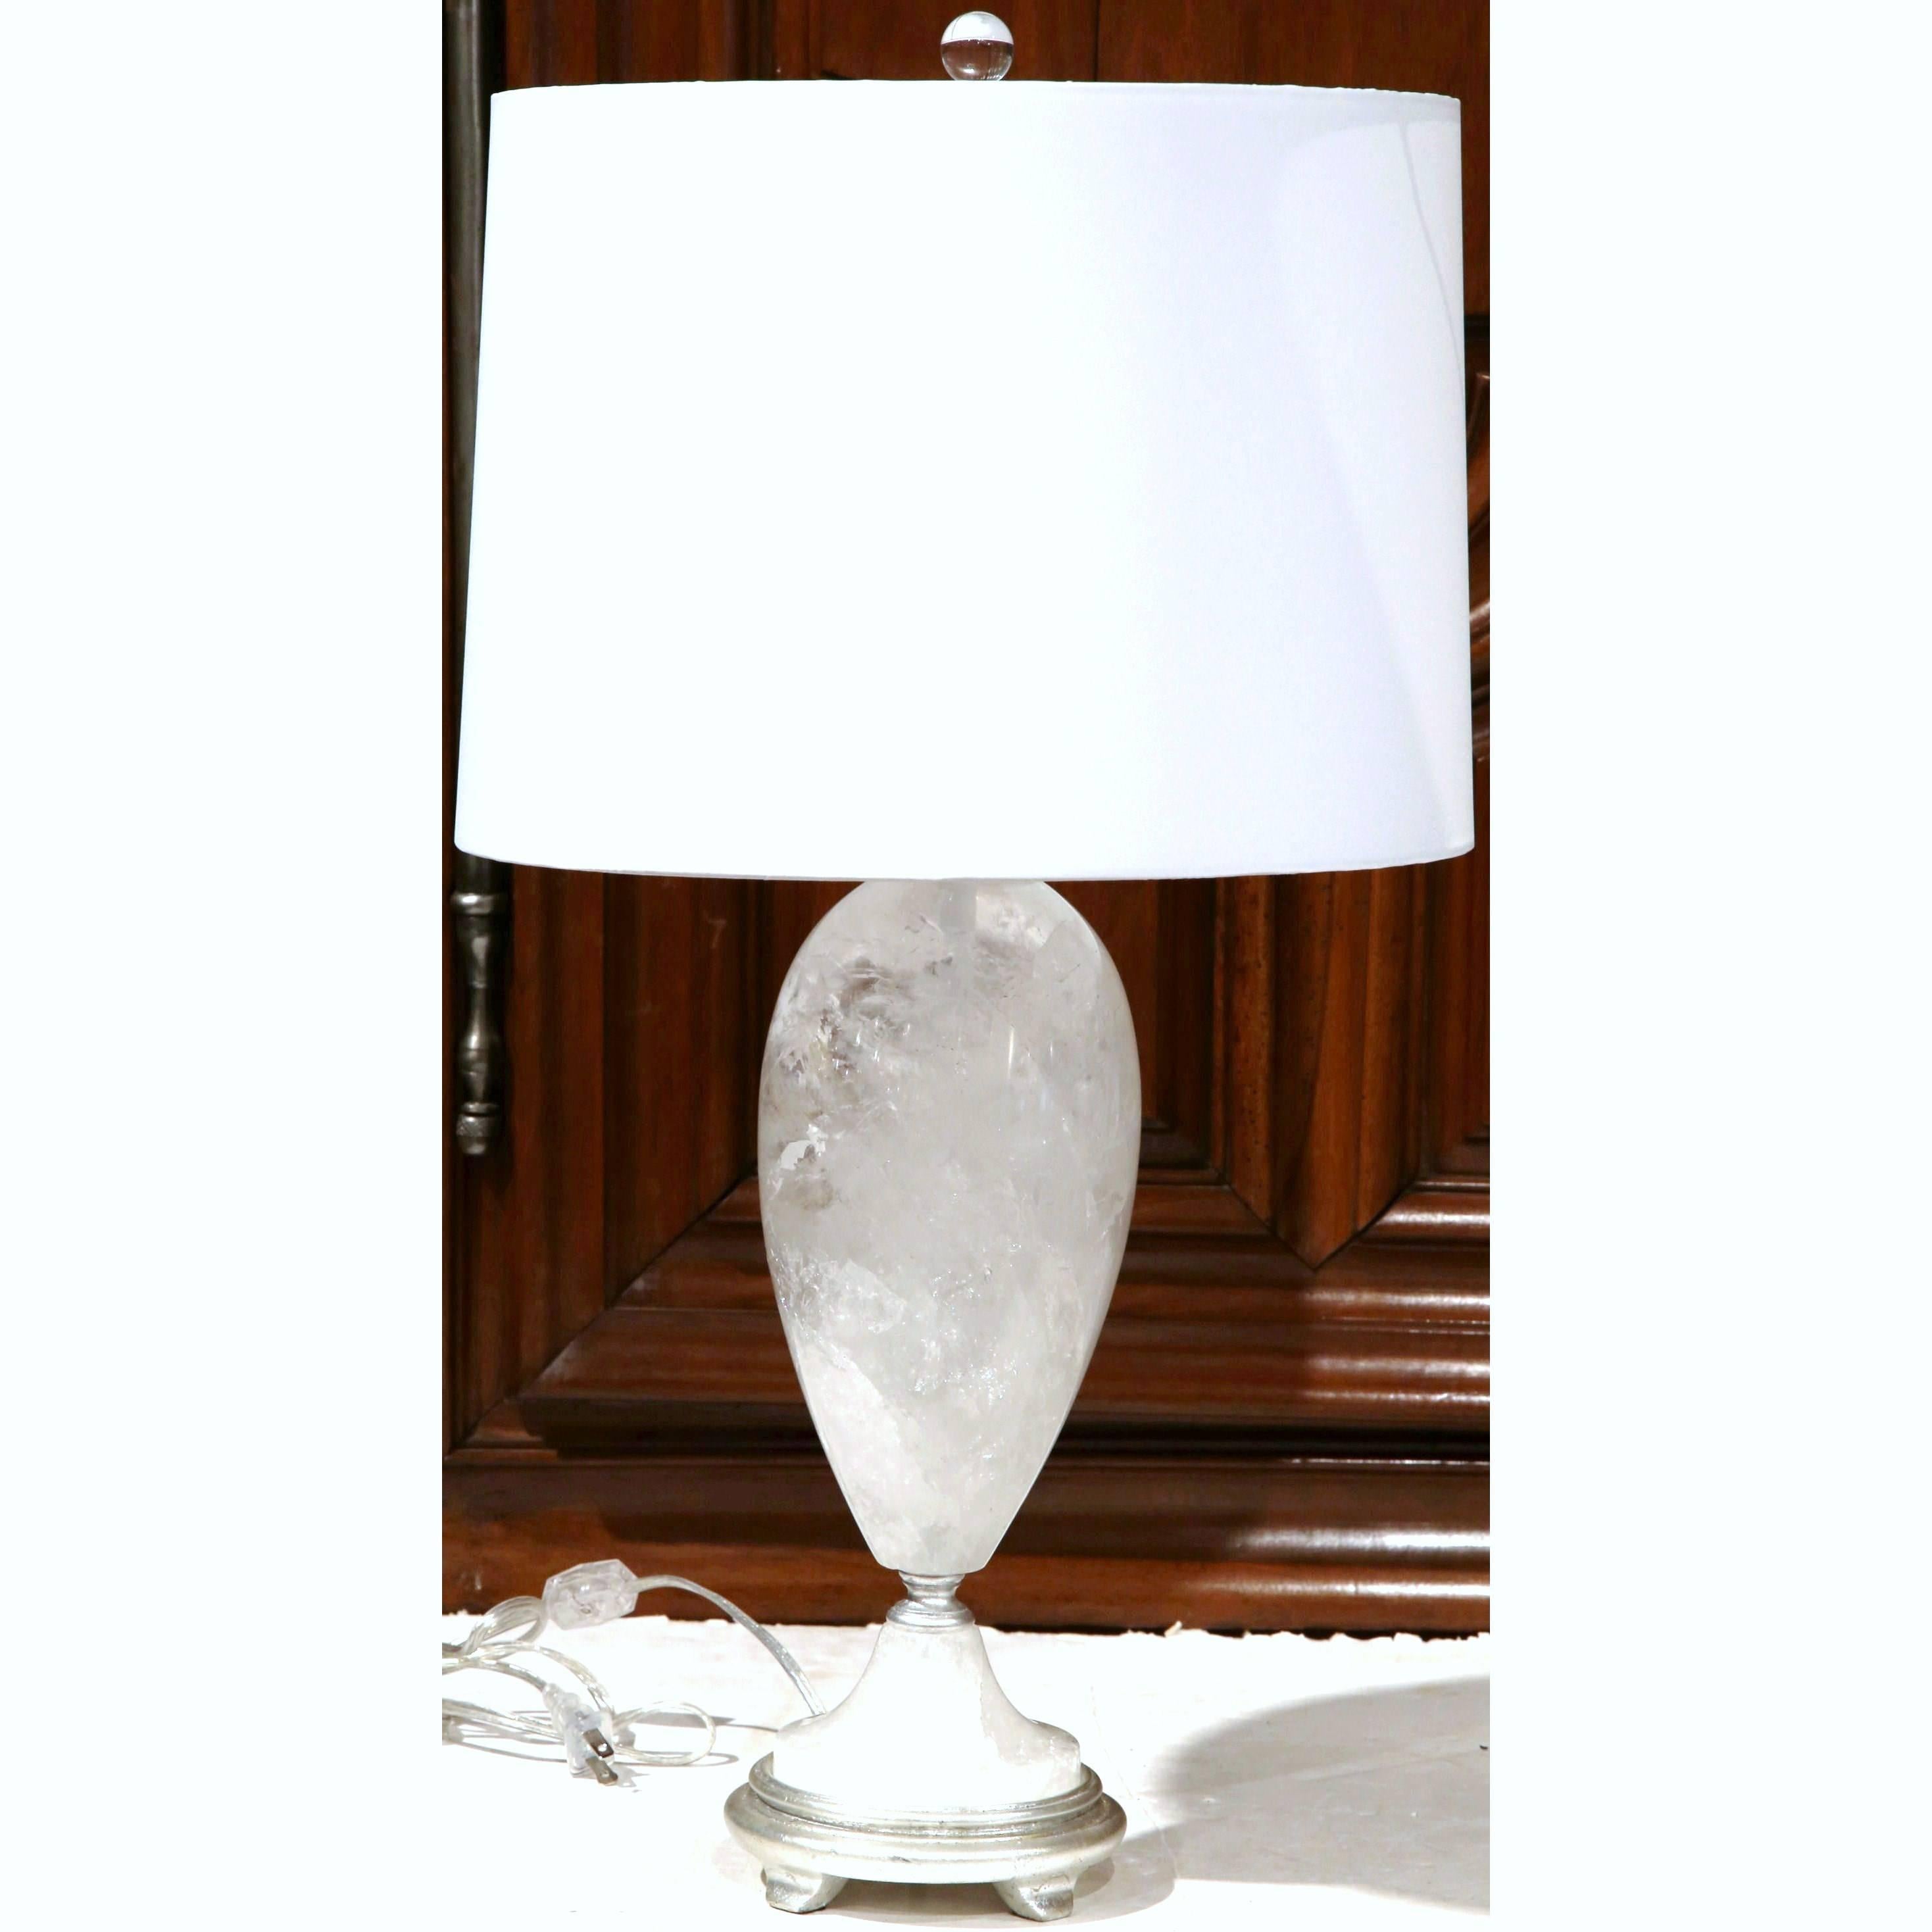 Brazilian Pair of Rock Crystal Table Lamps from Brazil with Round Shades and Finials